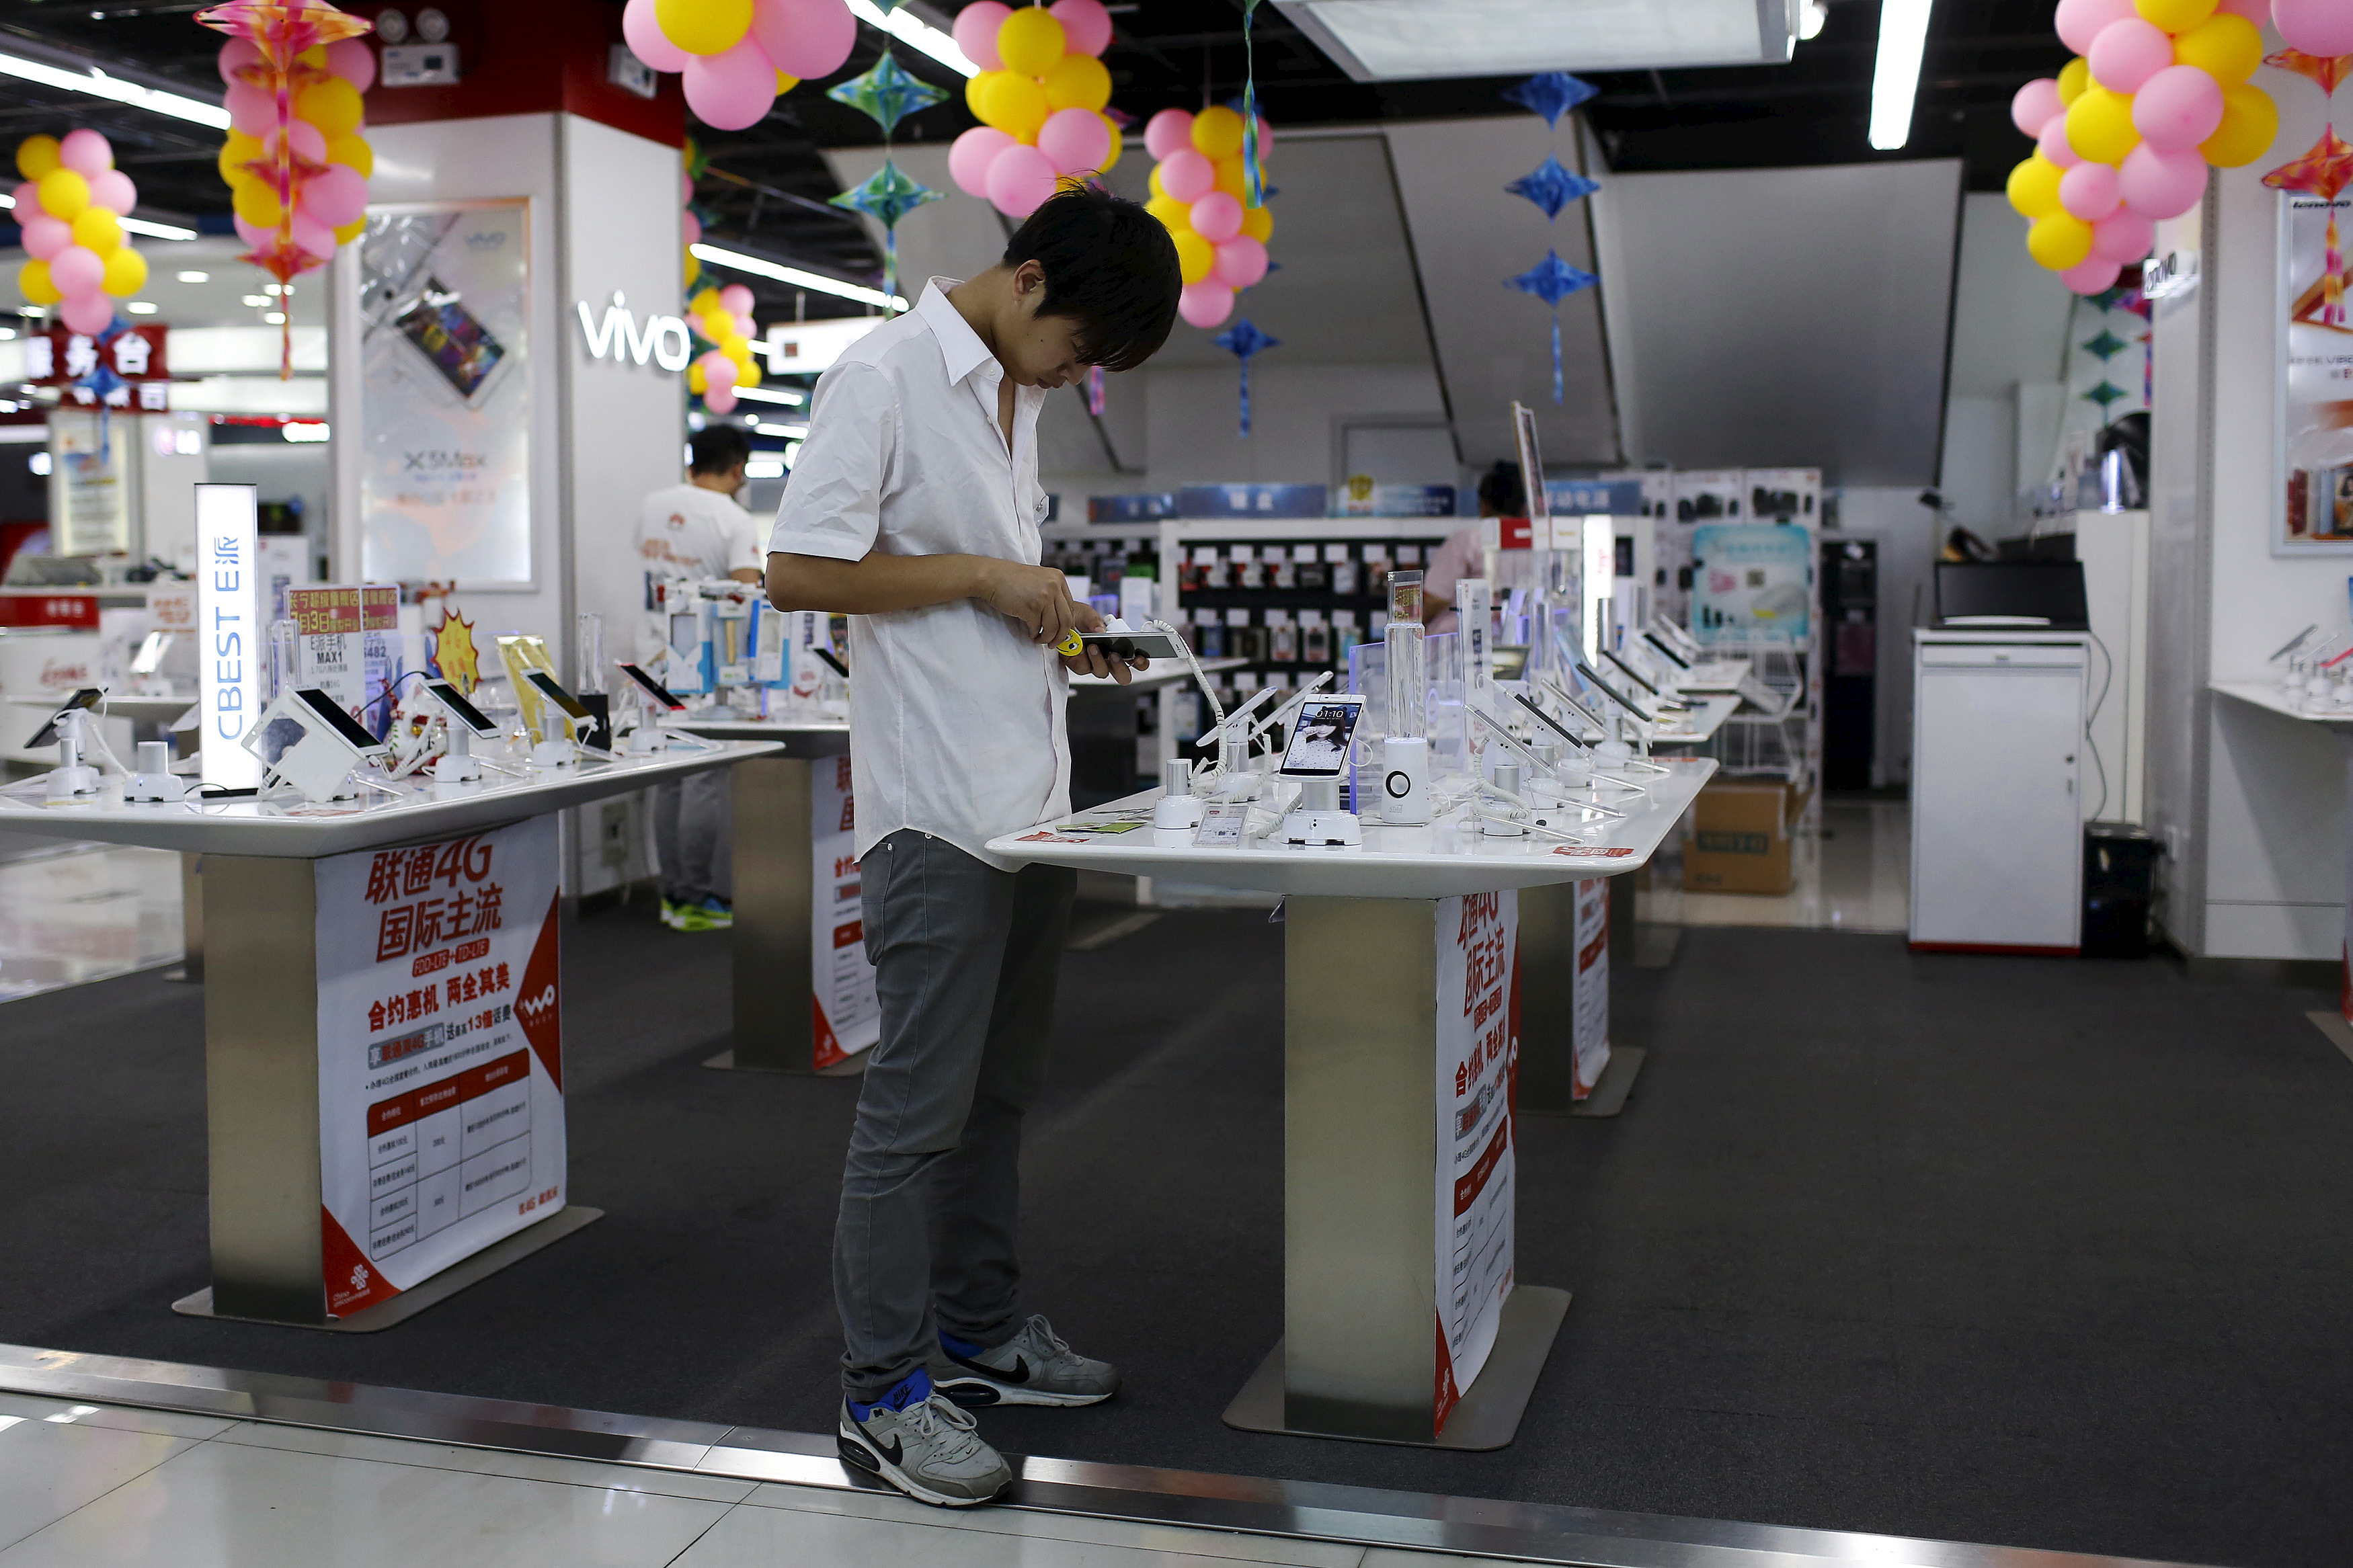 A customer look at a mobile phone on display at an electronics market in Shanghai